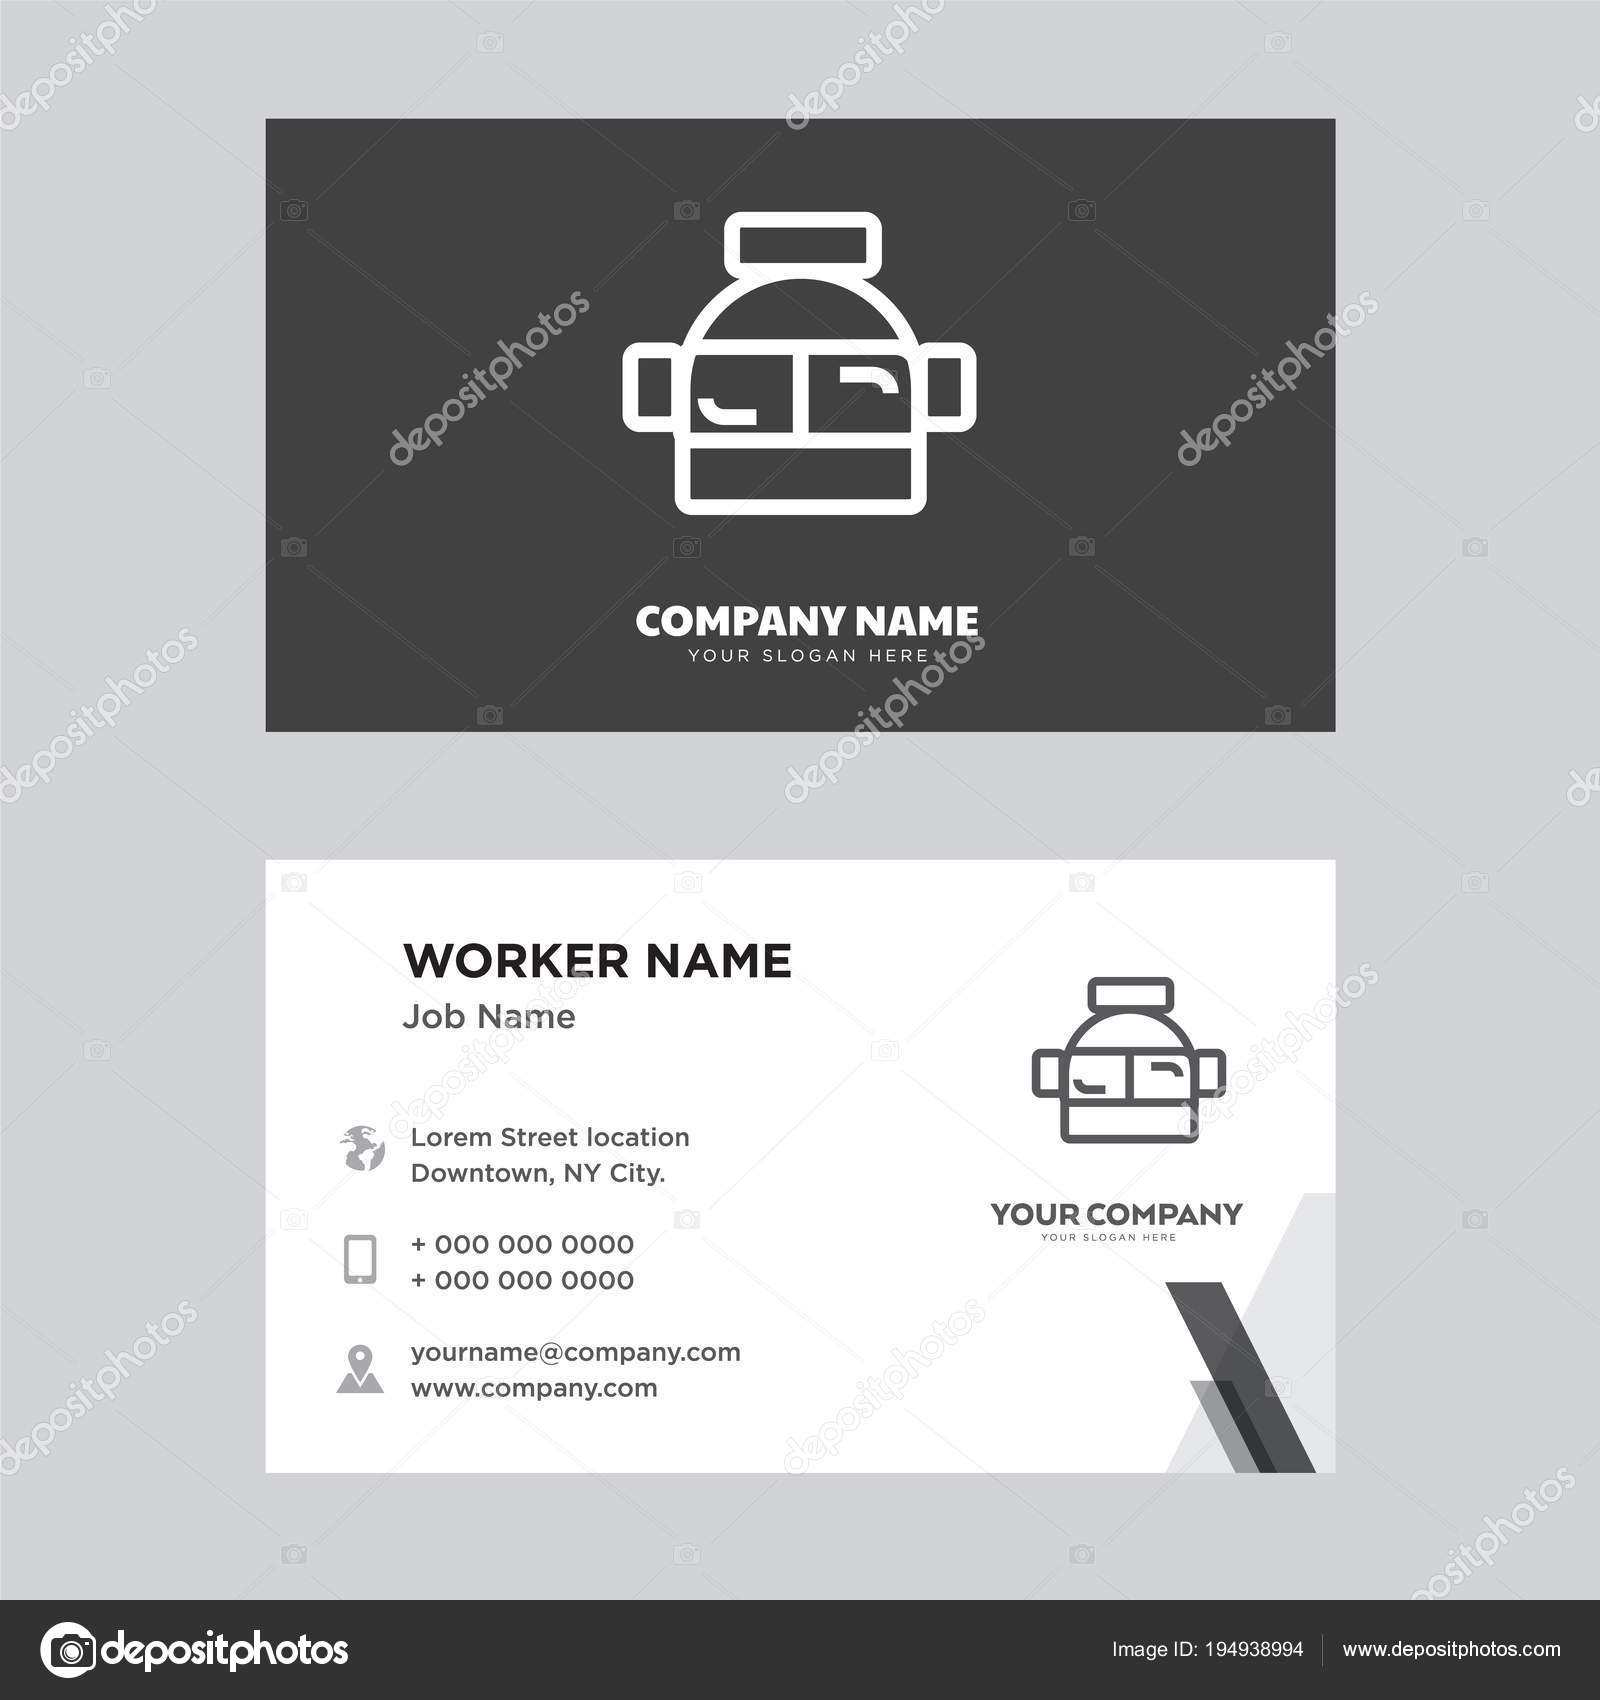 18 Best Astronaut Id Card Template Photo by Astronaut Id Card Template